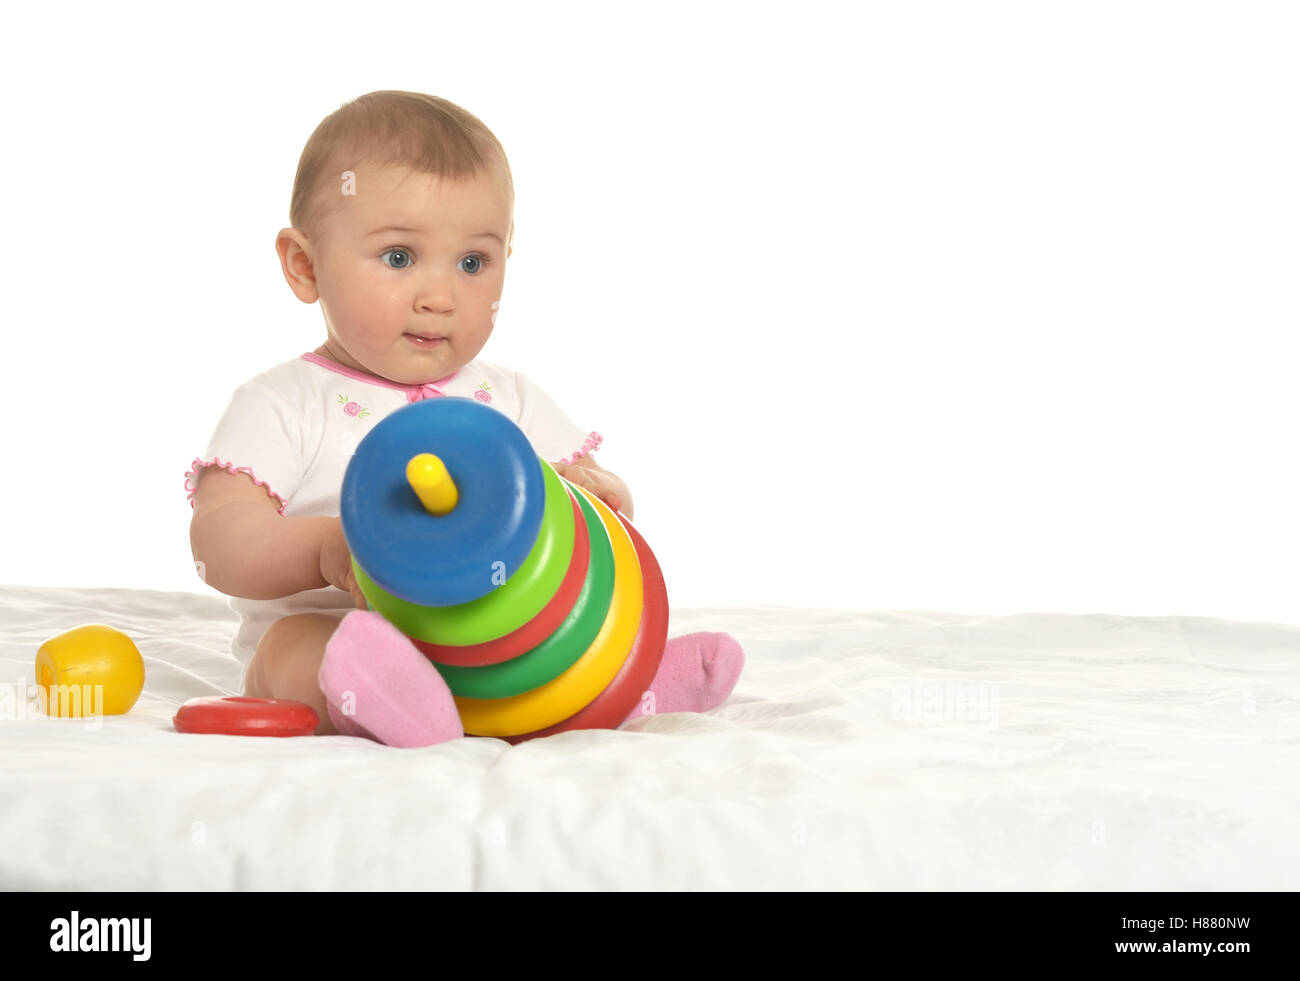 Cute baby wih toy Stock Photo